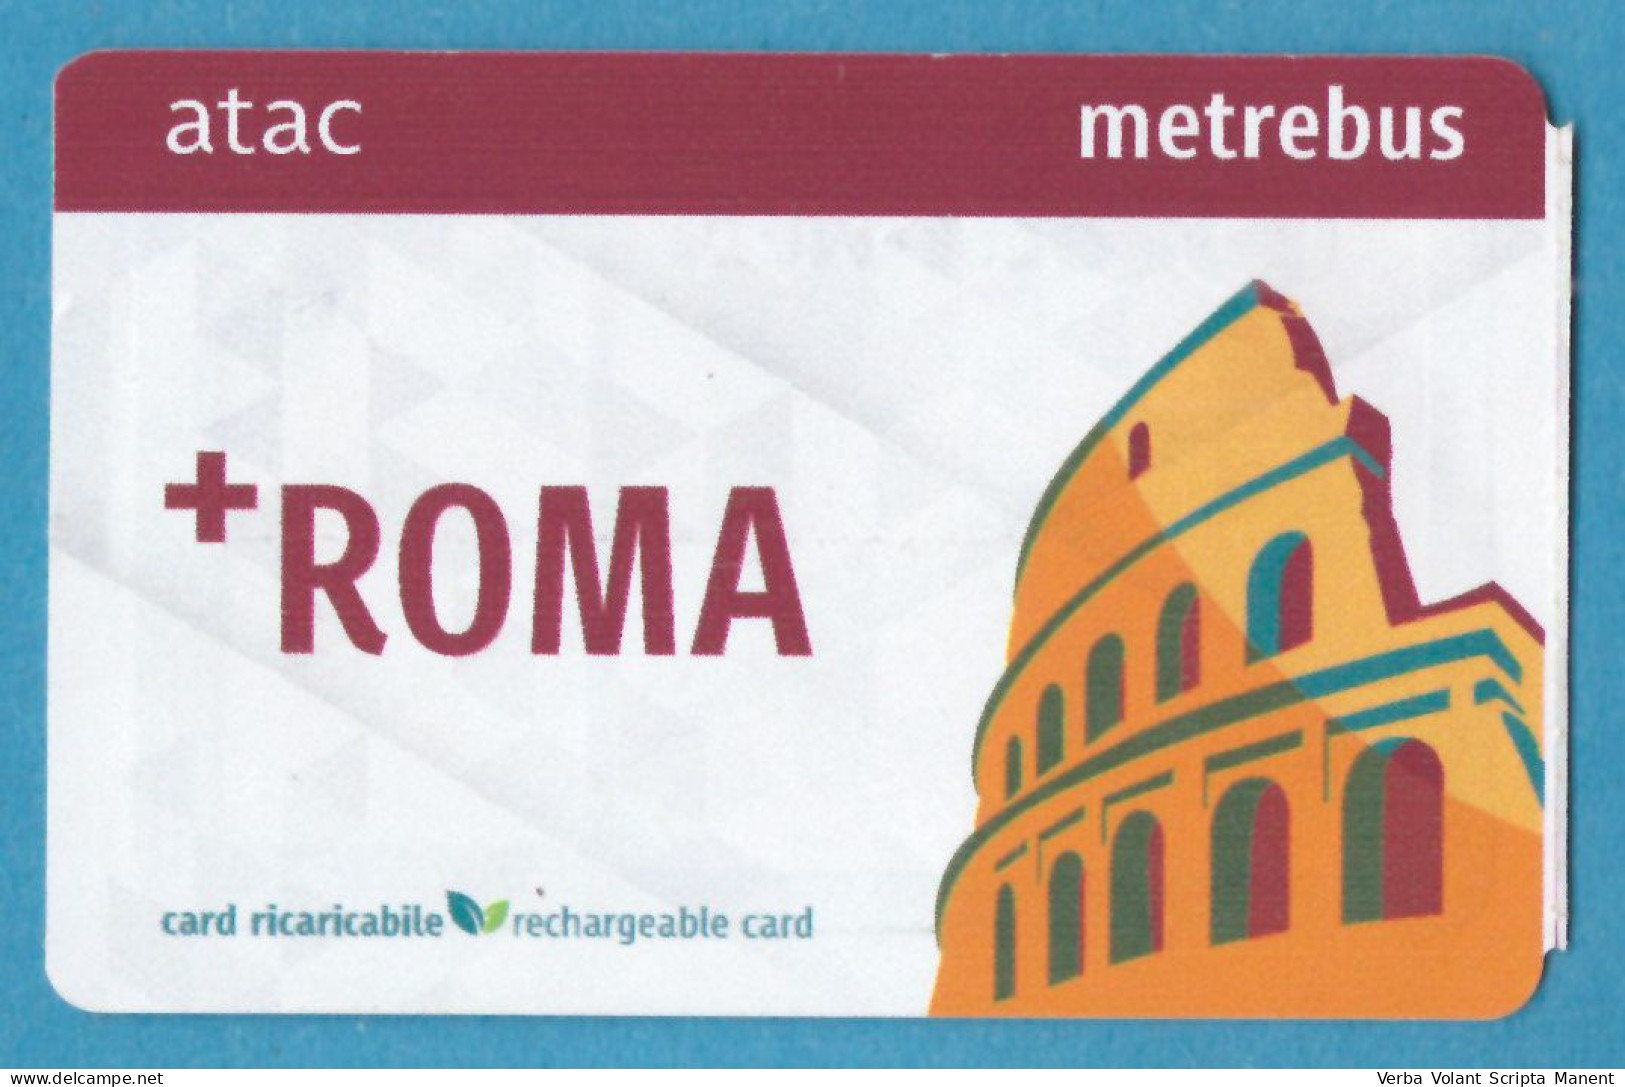 H-0600 * ITALY - Card Ricaricabile / Rechargeable +ROMA, ATAC Metrebus - Europe